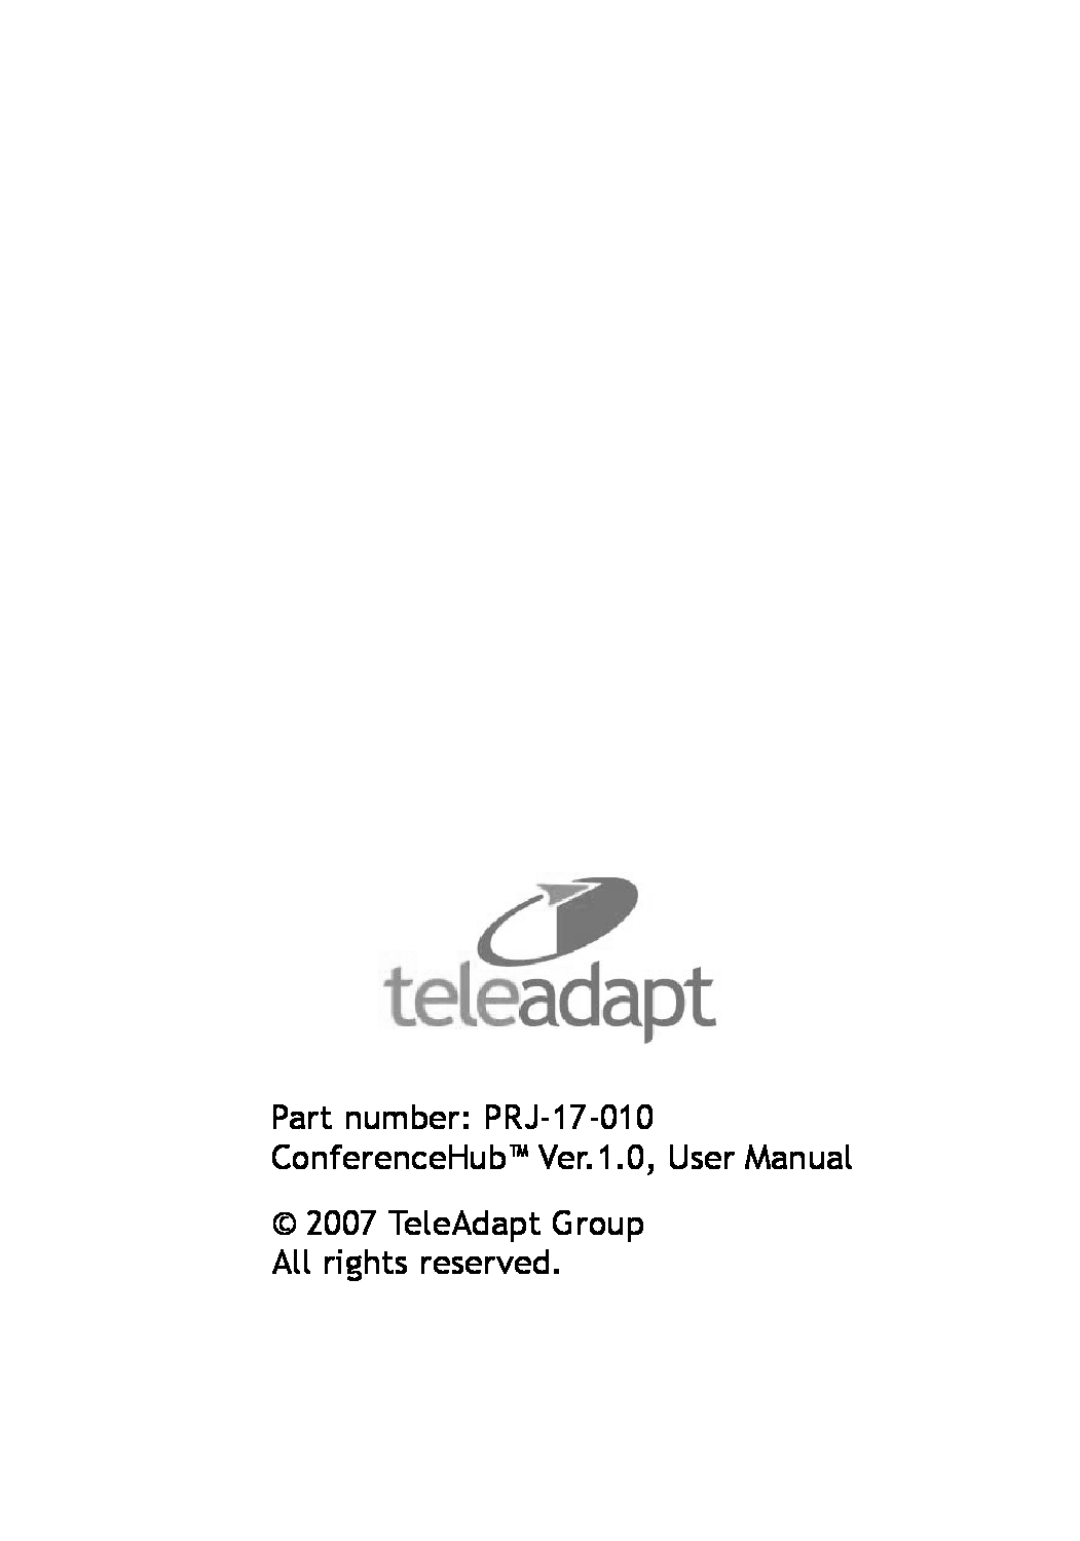 TeleAdapt TA-6500 TeleAdapt Group All rights reserved, Part number PRJ-17-010 ConferenceHub Ver.1.0, User Manual 